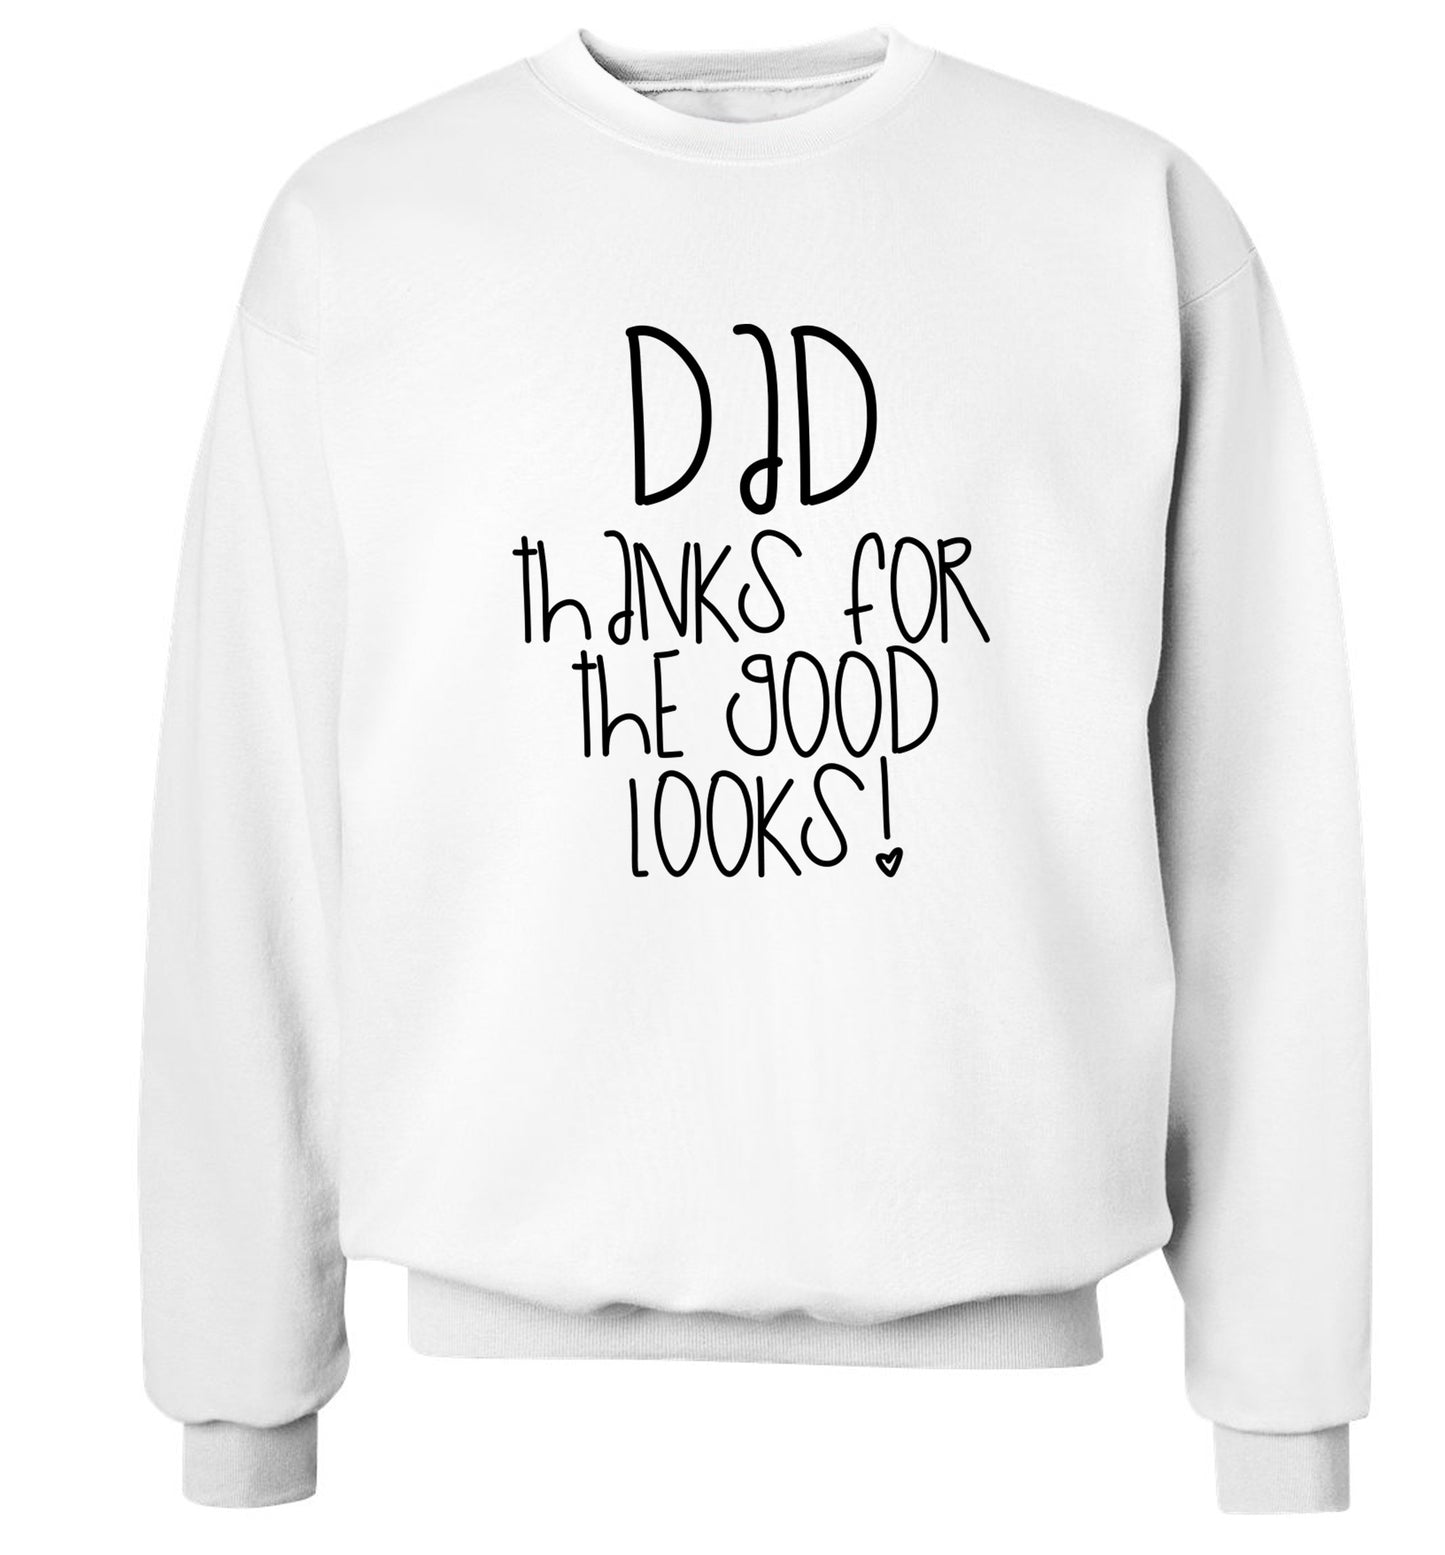 Dad thanks for the good looks Adult's unisex white Sweater 2XL